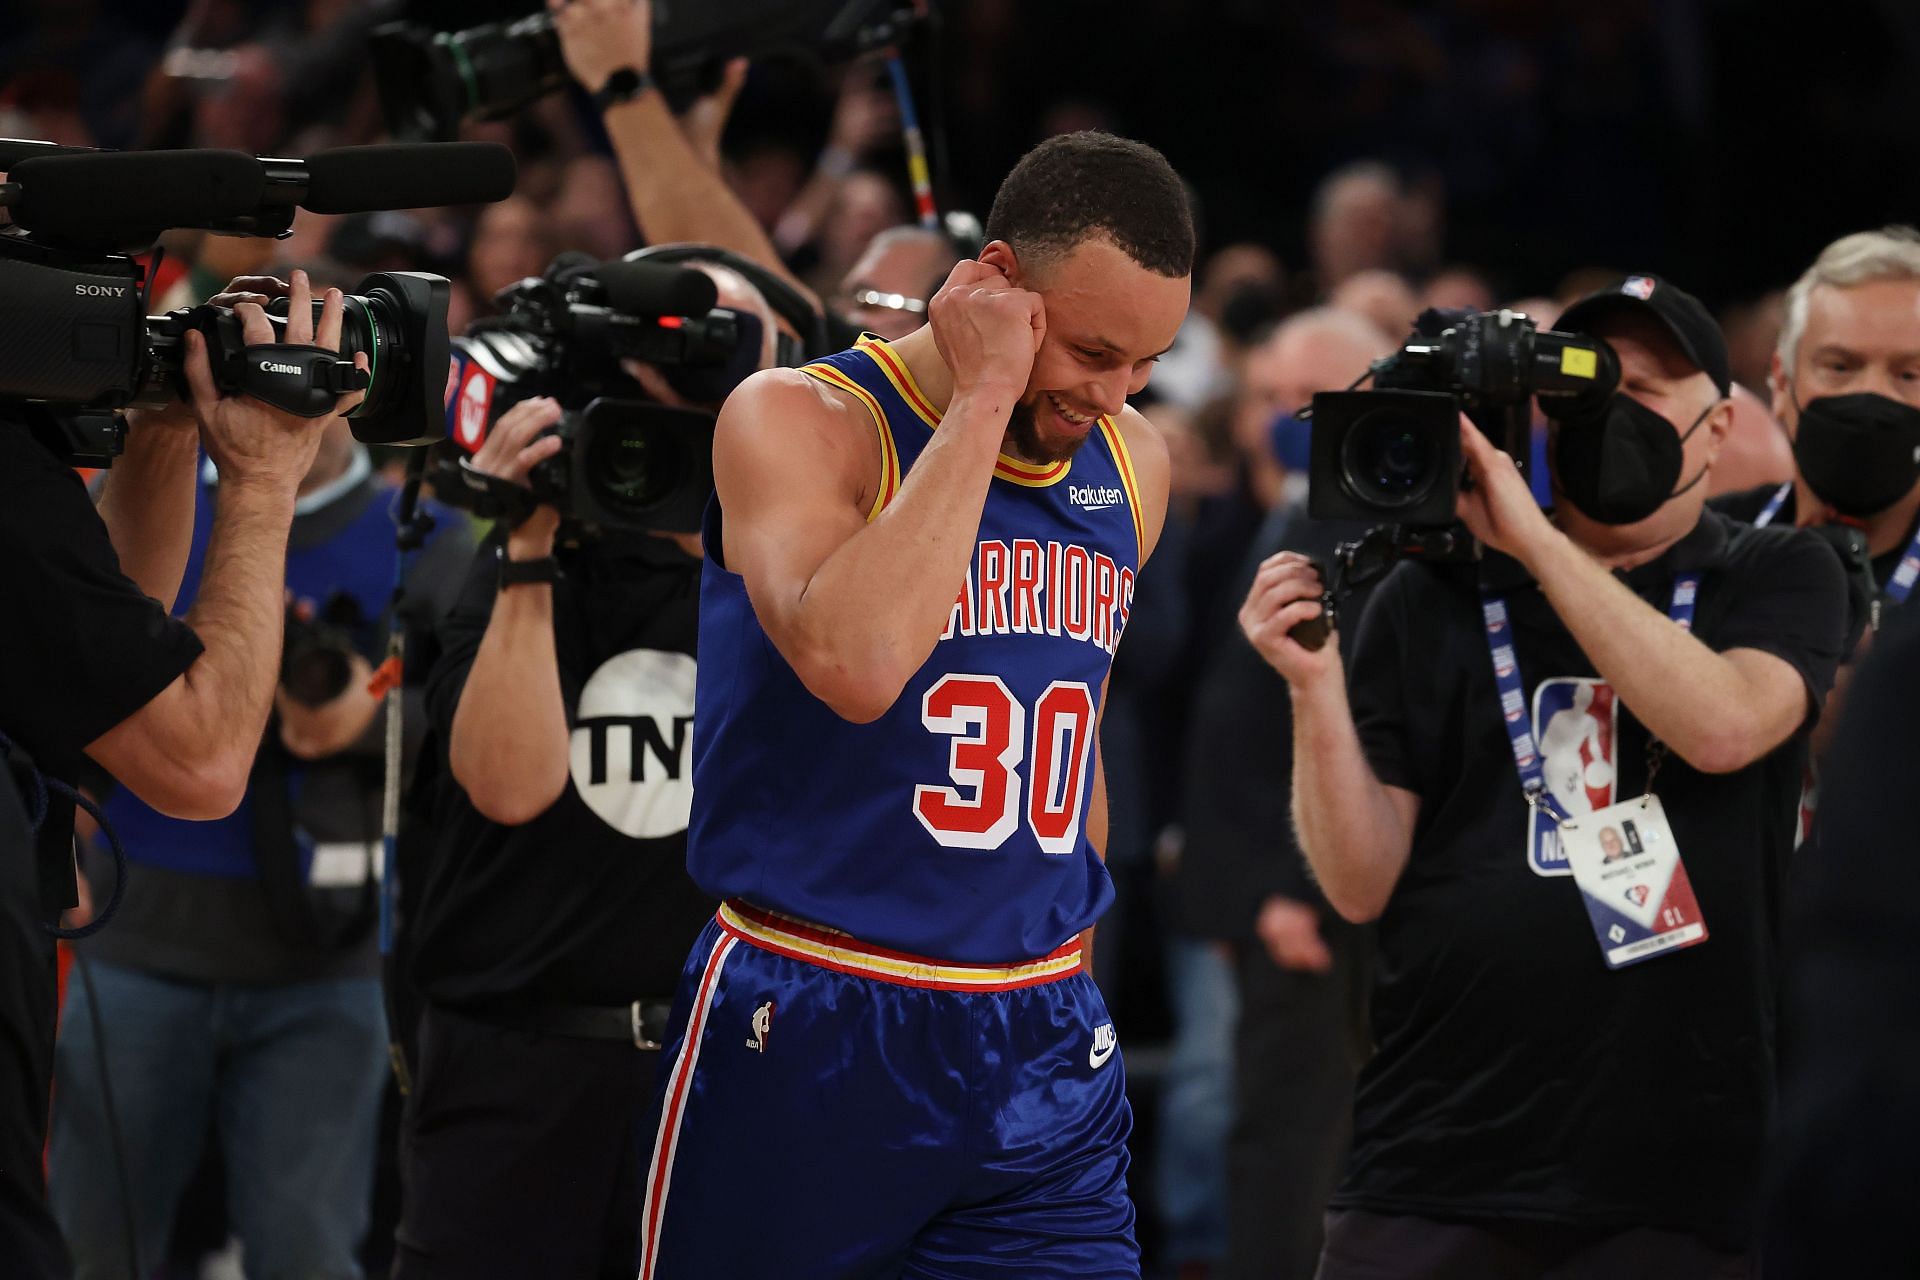 Stephen Curry had a historic night at the MSG